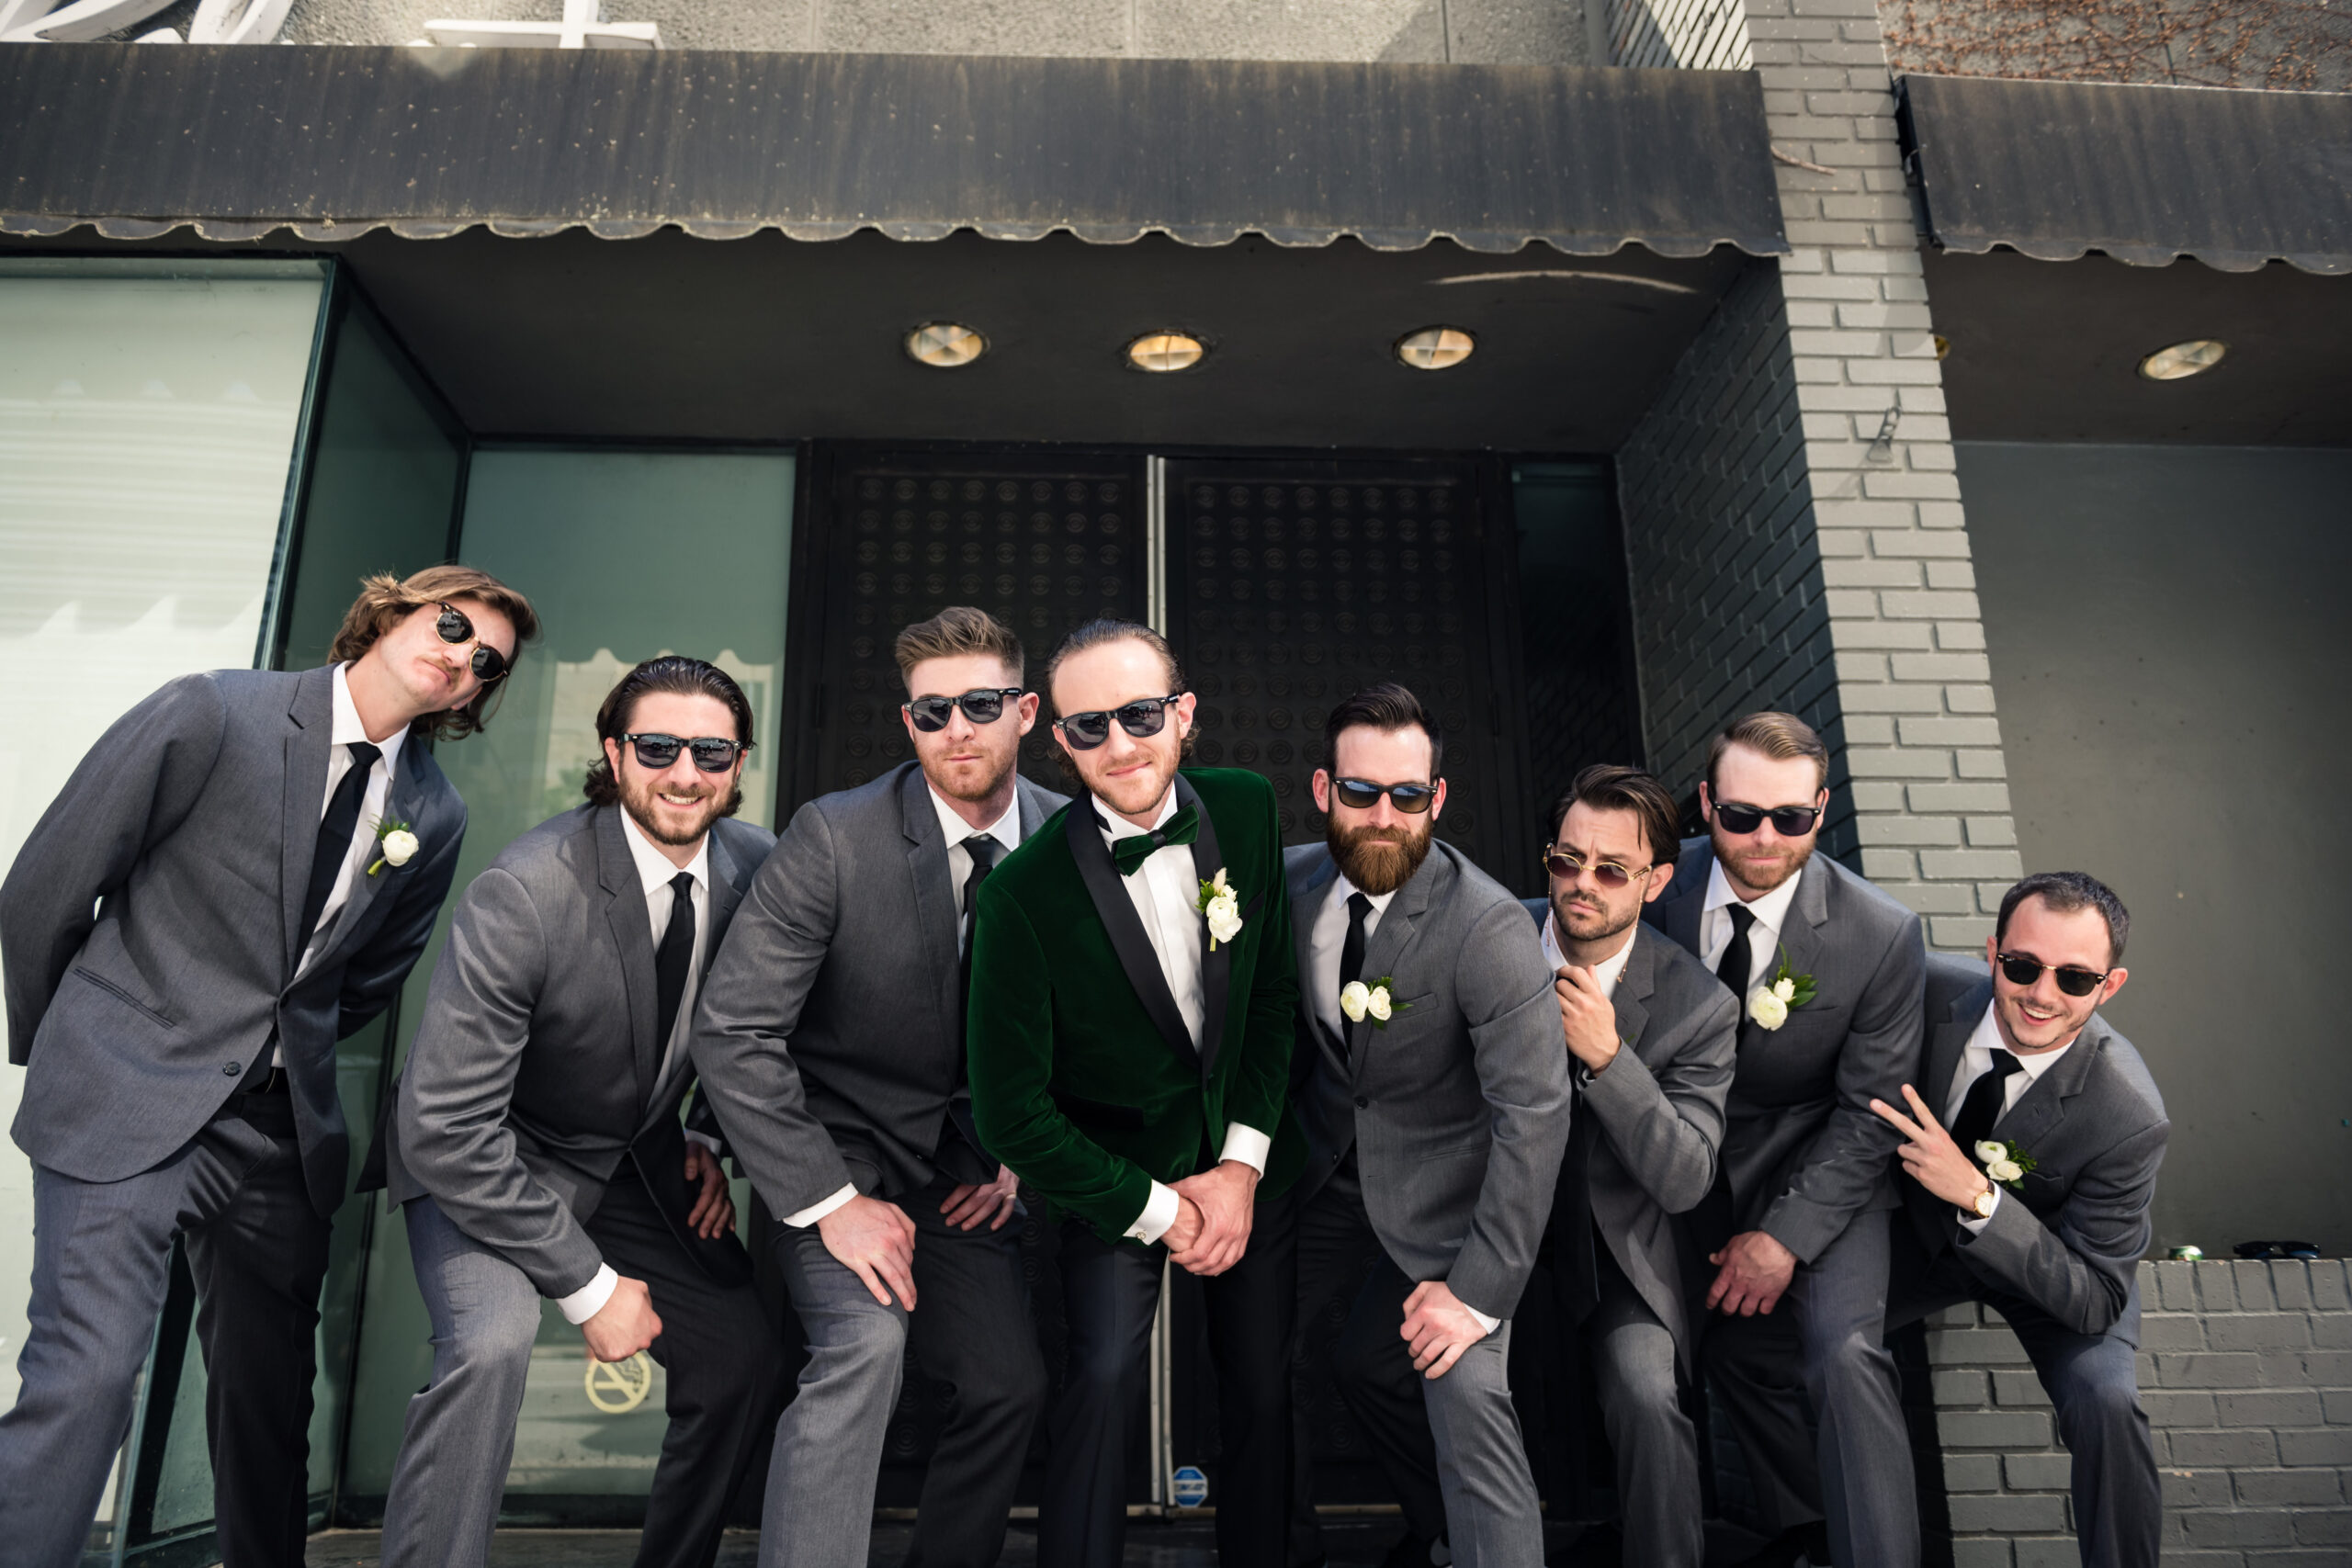 The groom and his groomsmen are bending towards the camera, wearing their black sunglasses.